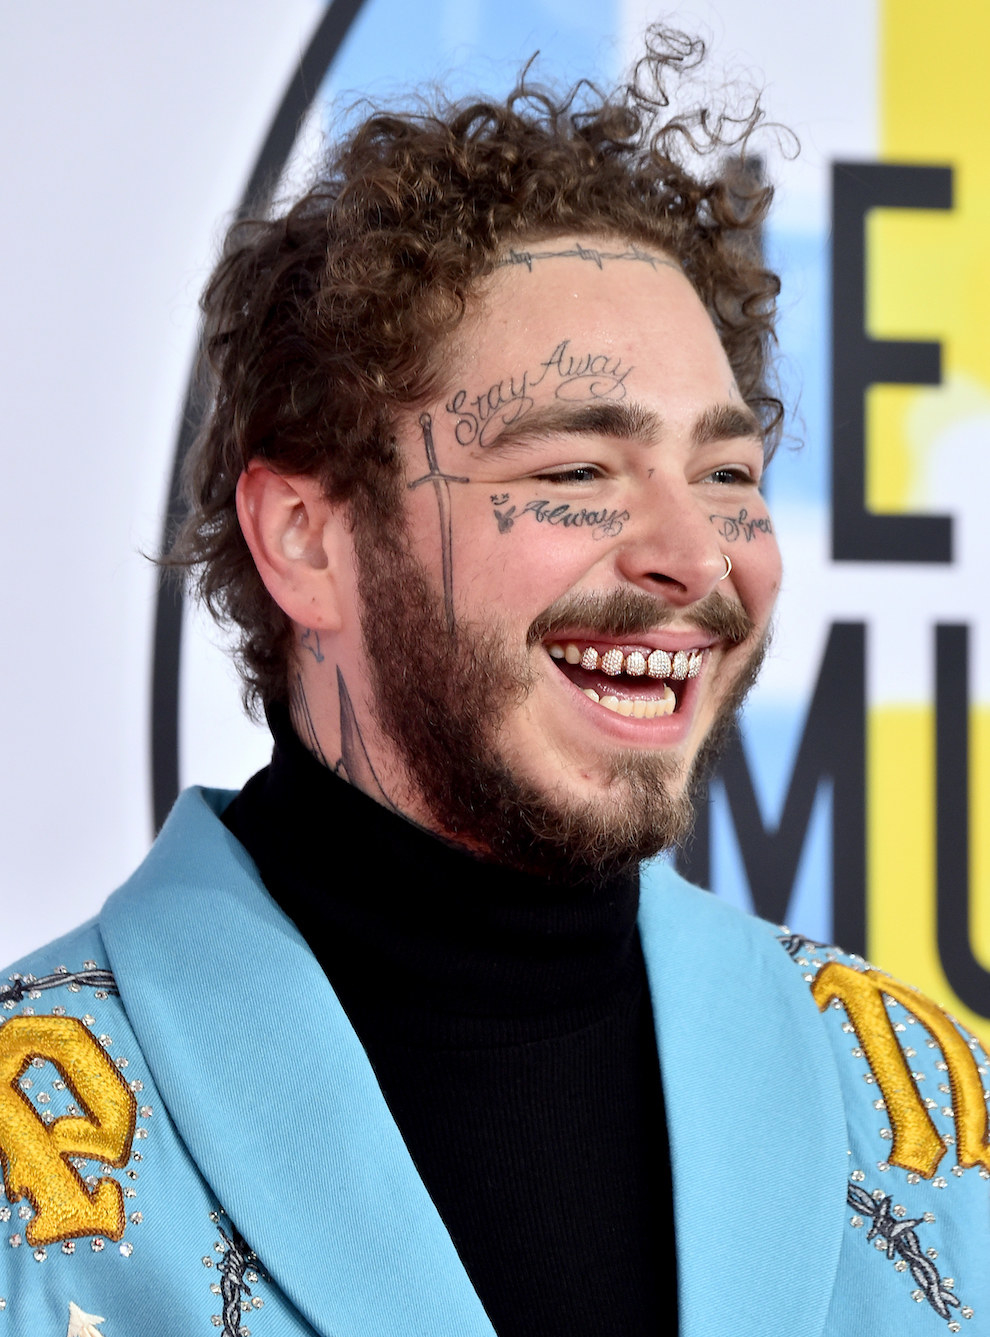 Rita Ora Dressed As Post Malone For Halloween And You've Simply Gotta ...